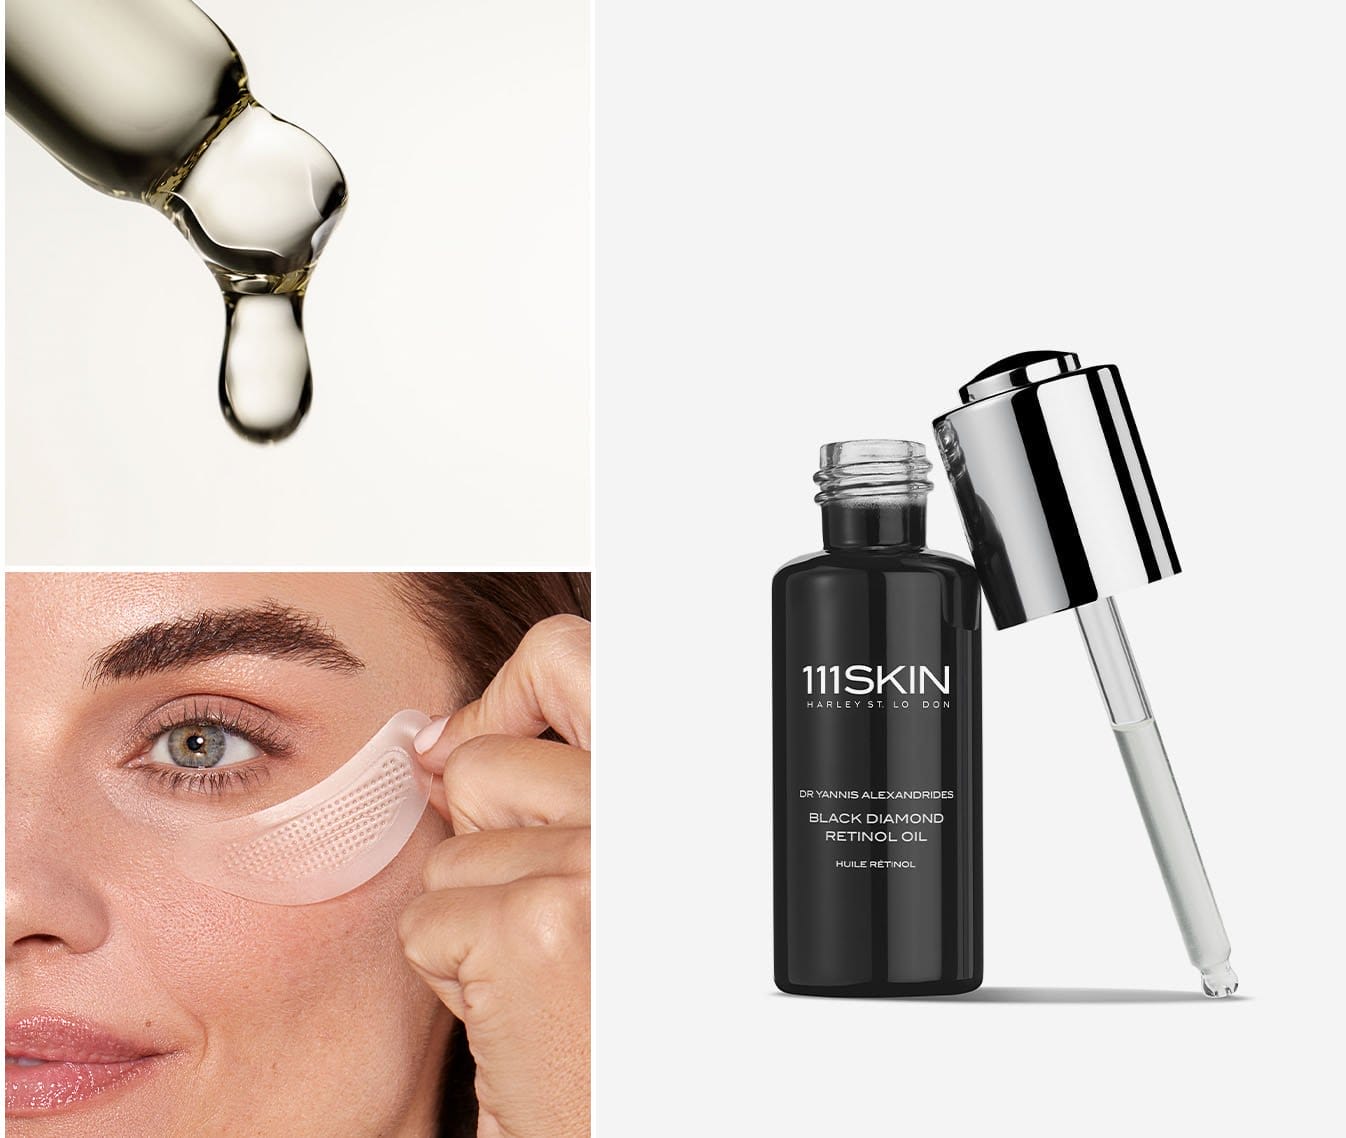 Retinol works by encouraging skin cell renewal to reverse the signs of ageing